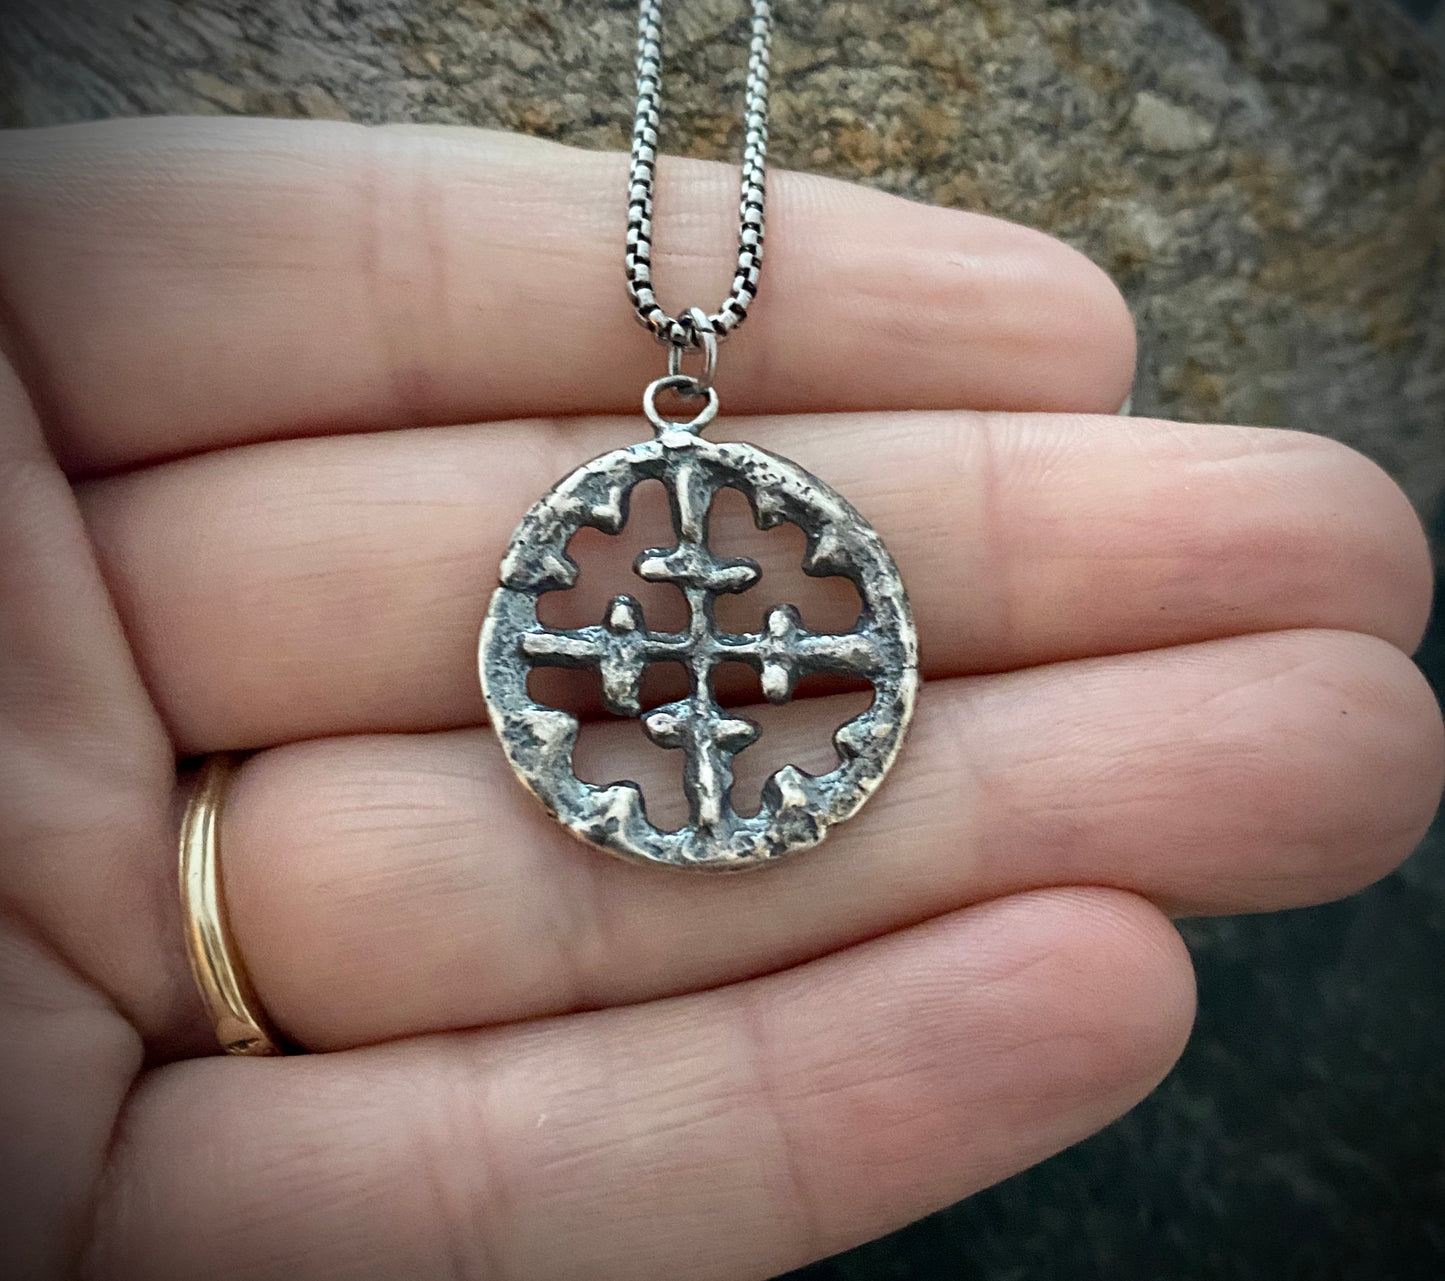 Sterling Silver Mens Necklace, Viking Era Cross produced from Original 10th Century Piece, Mens Fashion, Unisex Jewelry, SS-003